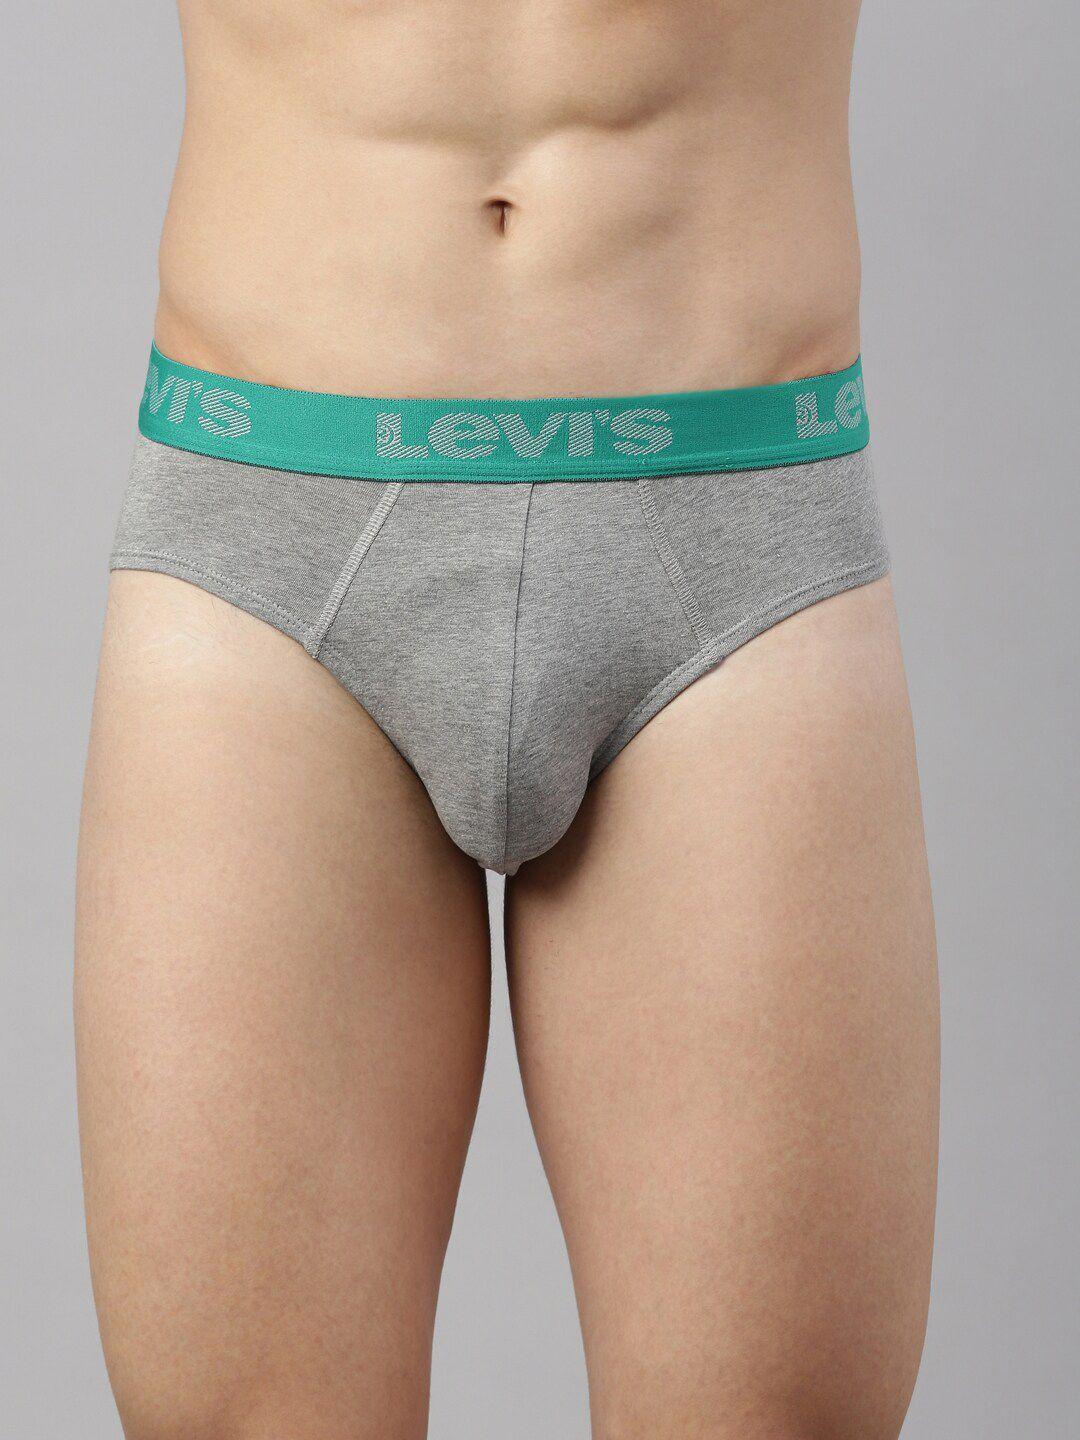 Levis Men Smartskin Technology Cotton Active Briefs with Tag Free Comfort #066